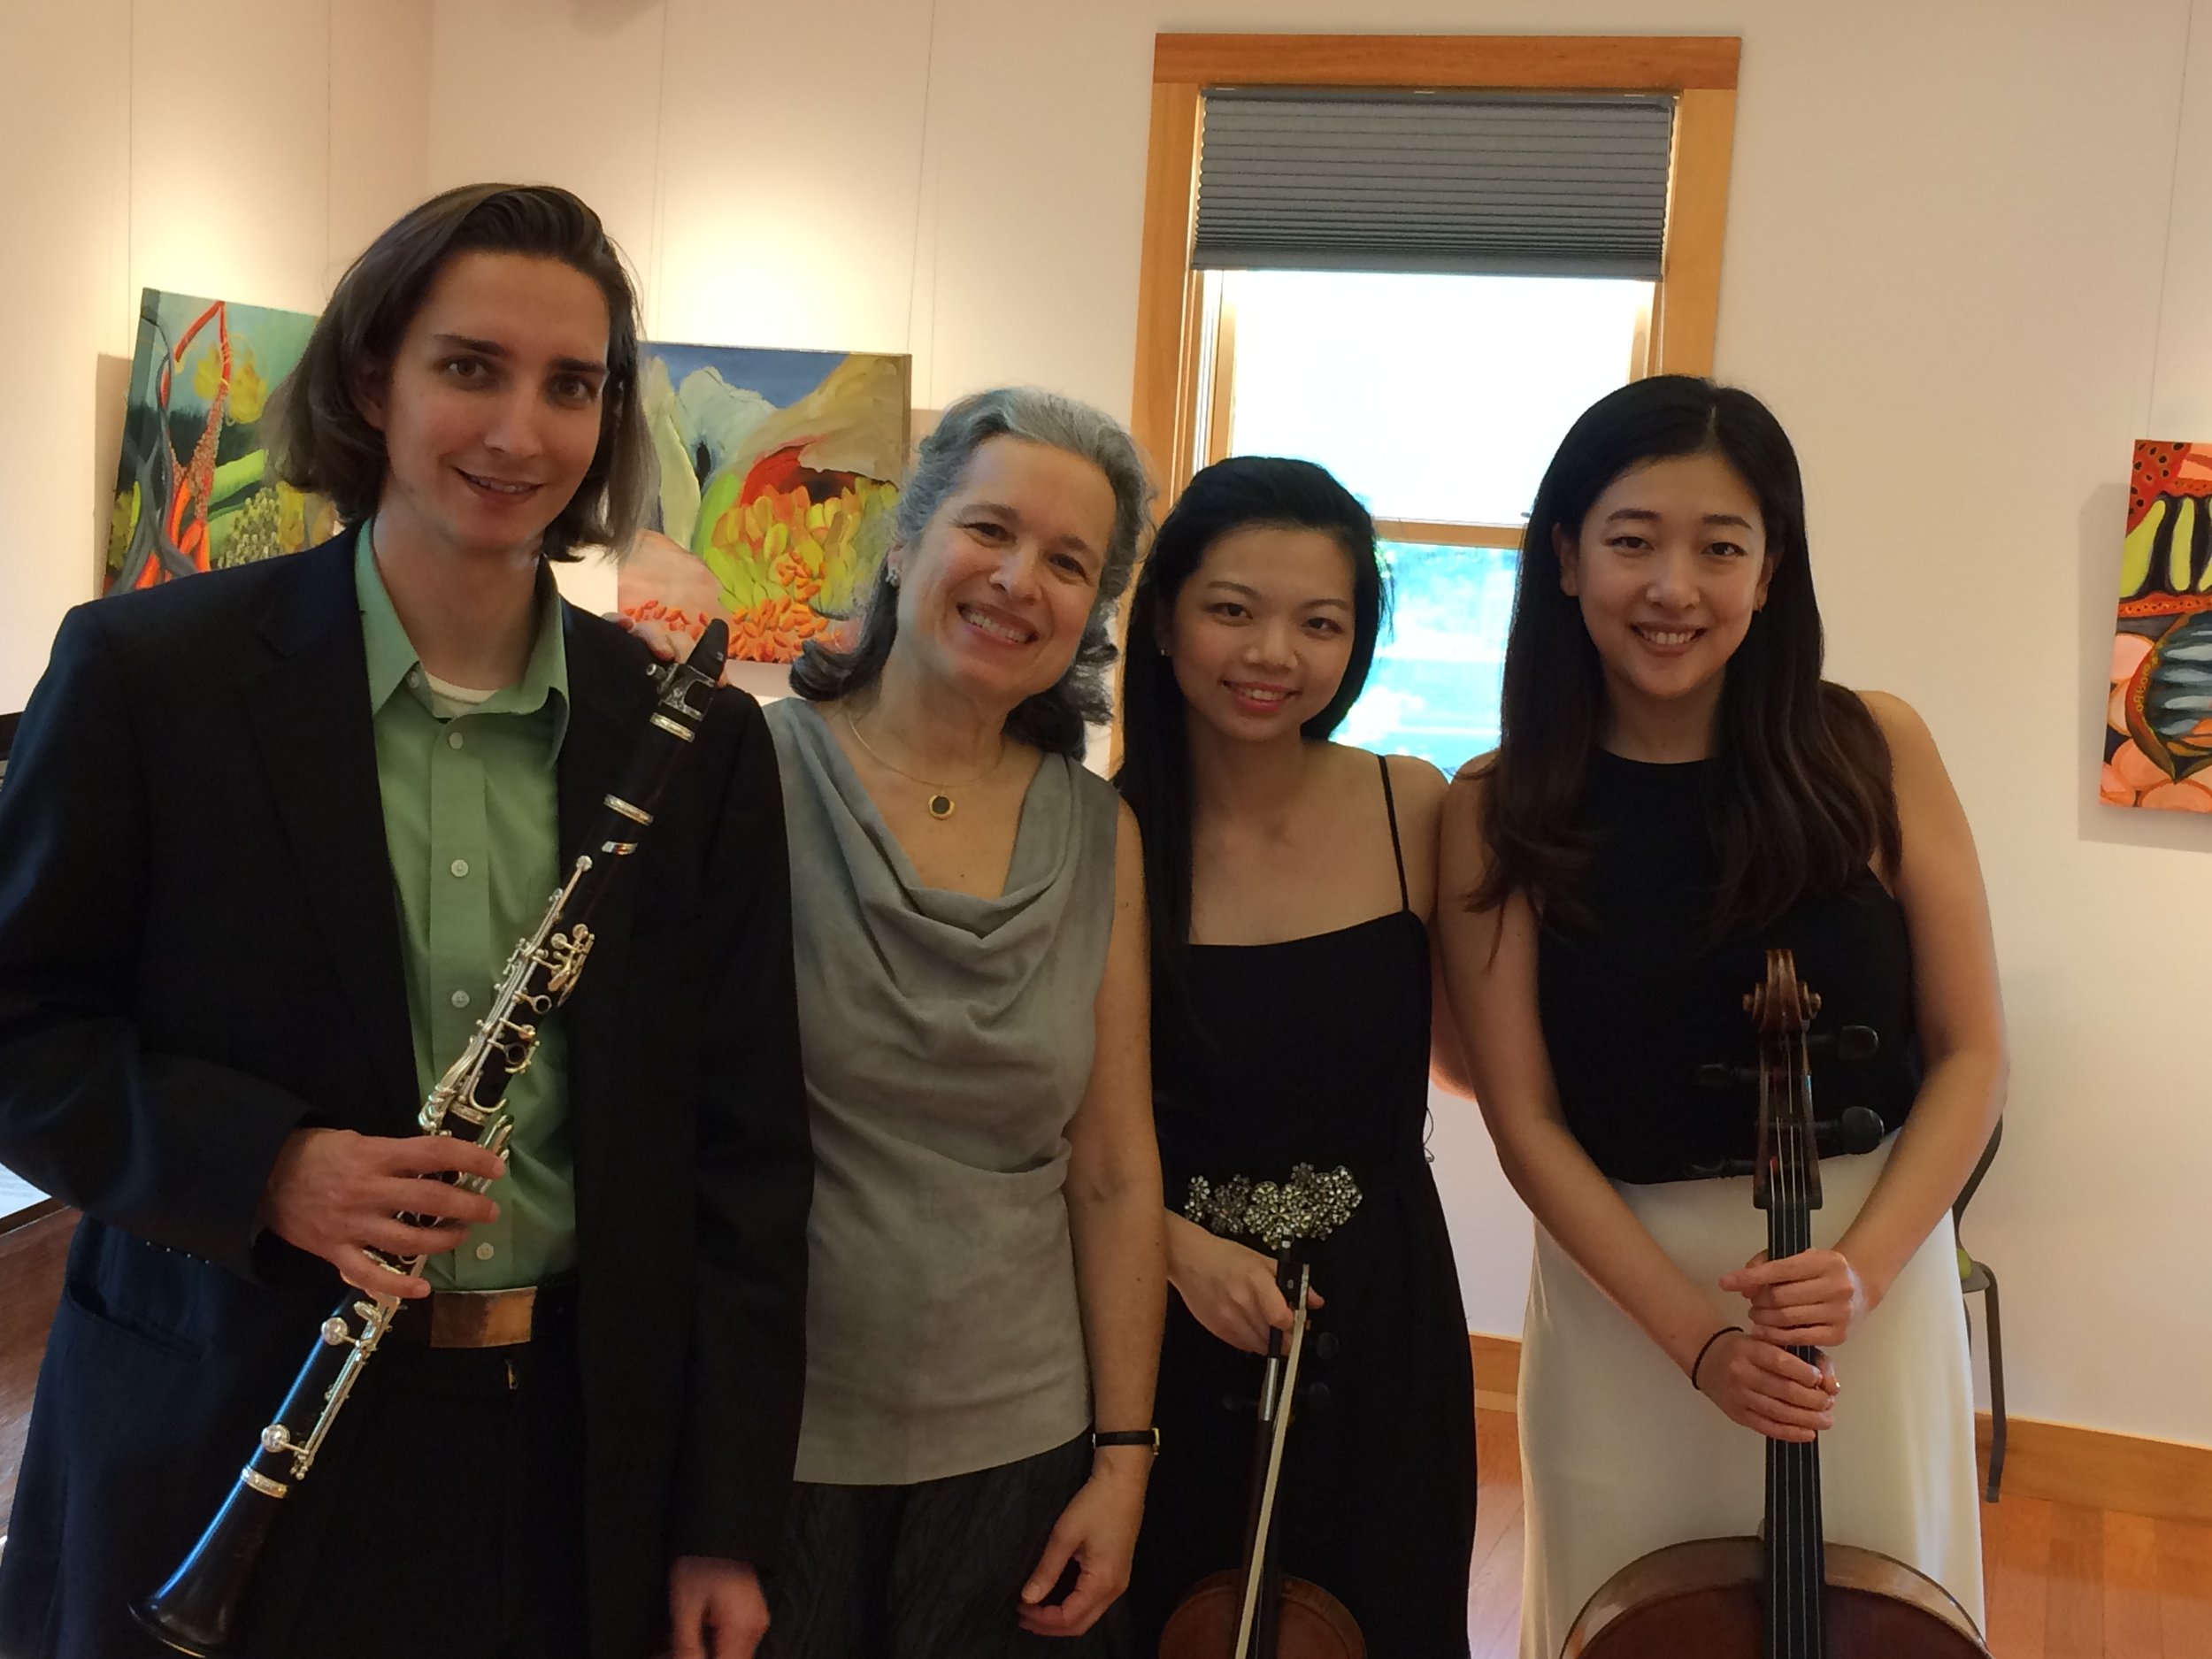  "Musical Spice and Musical Soul"    Alexis Lanz, Diane, I-Jung Huang  and  Jiyoung Lee   West Tisbury Library, Martha's Vineyard  June 10, 2017  